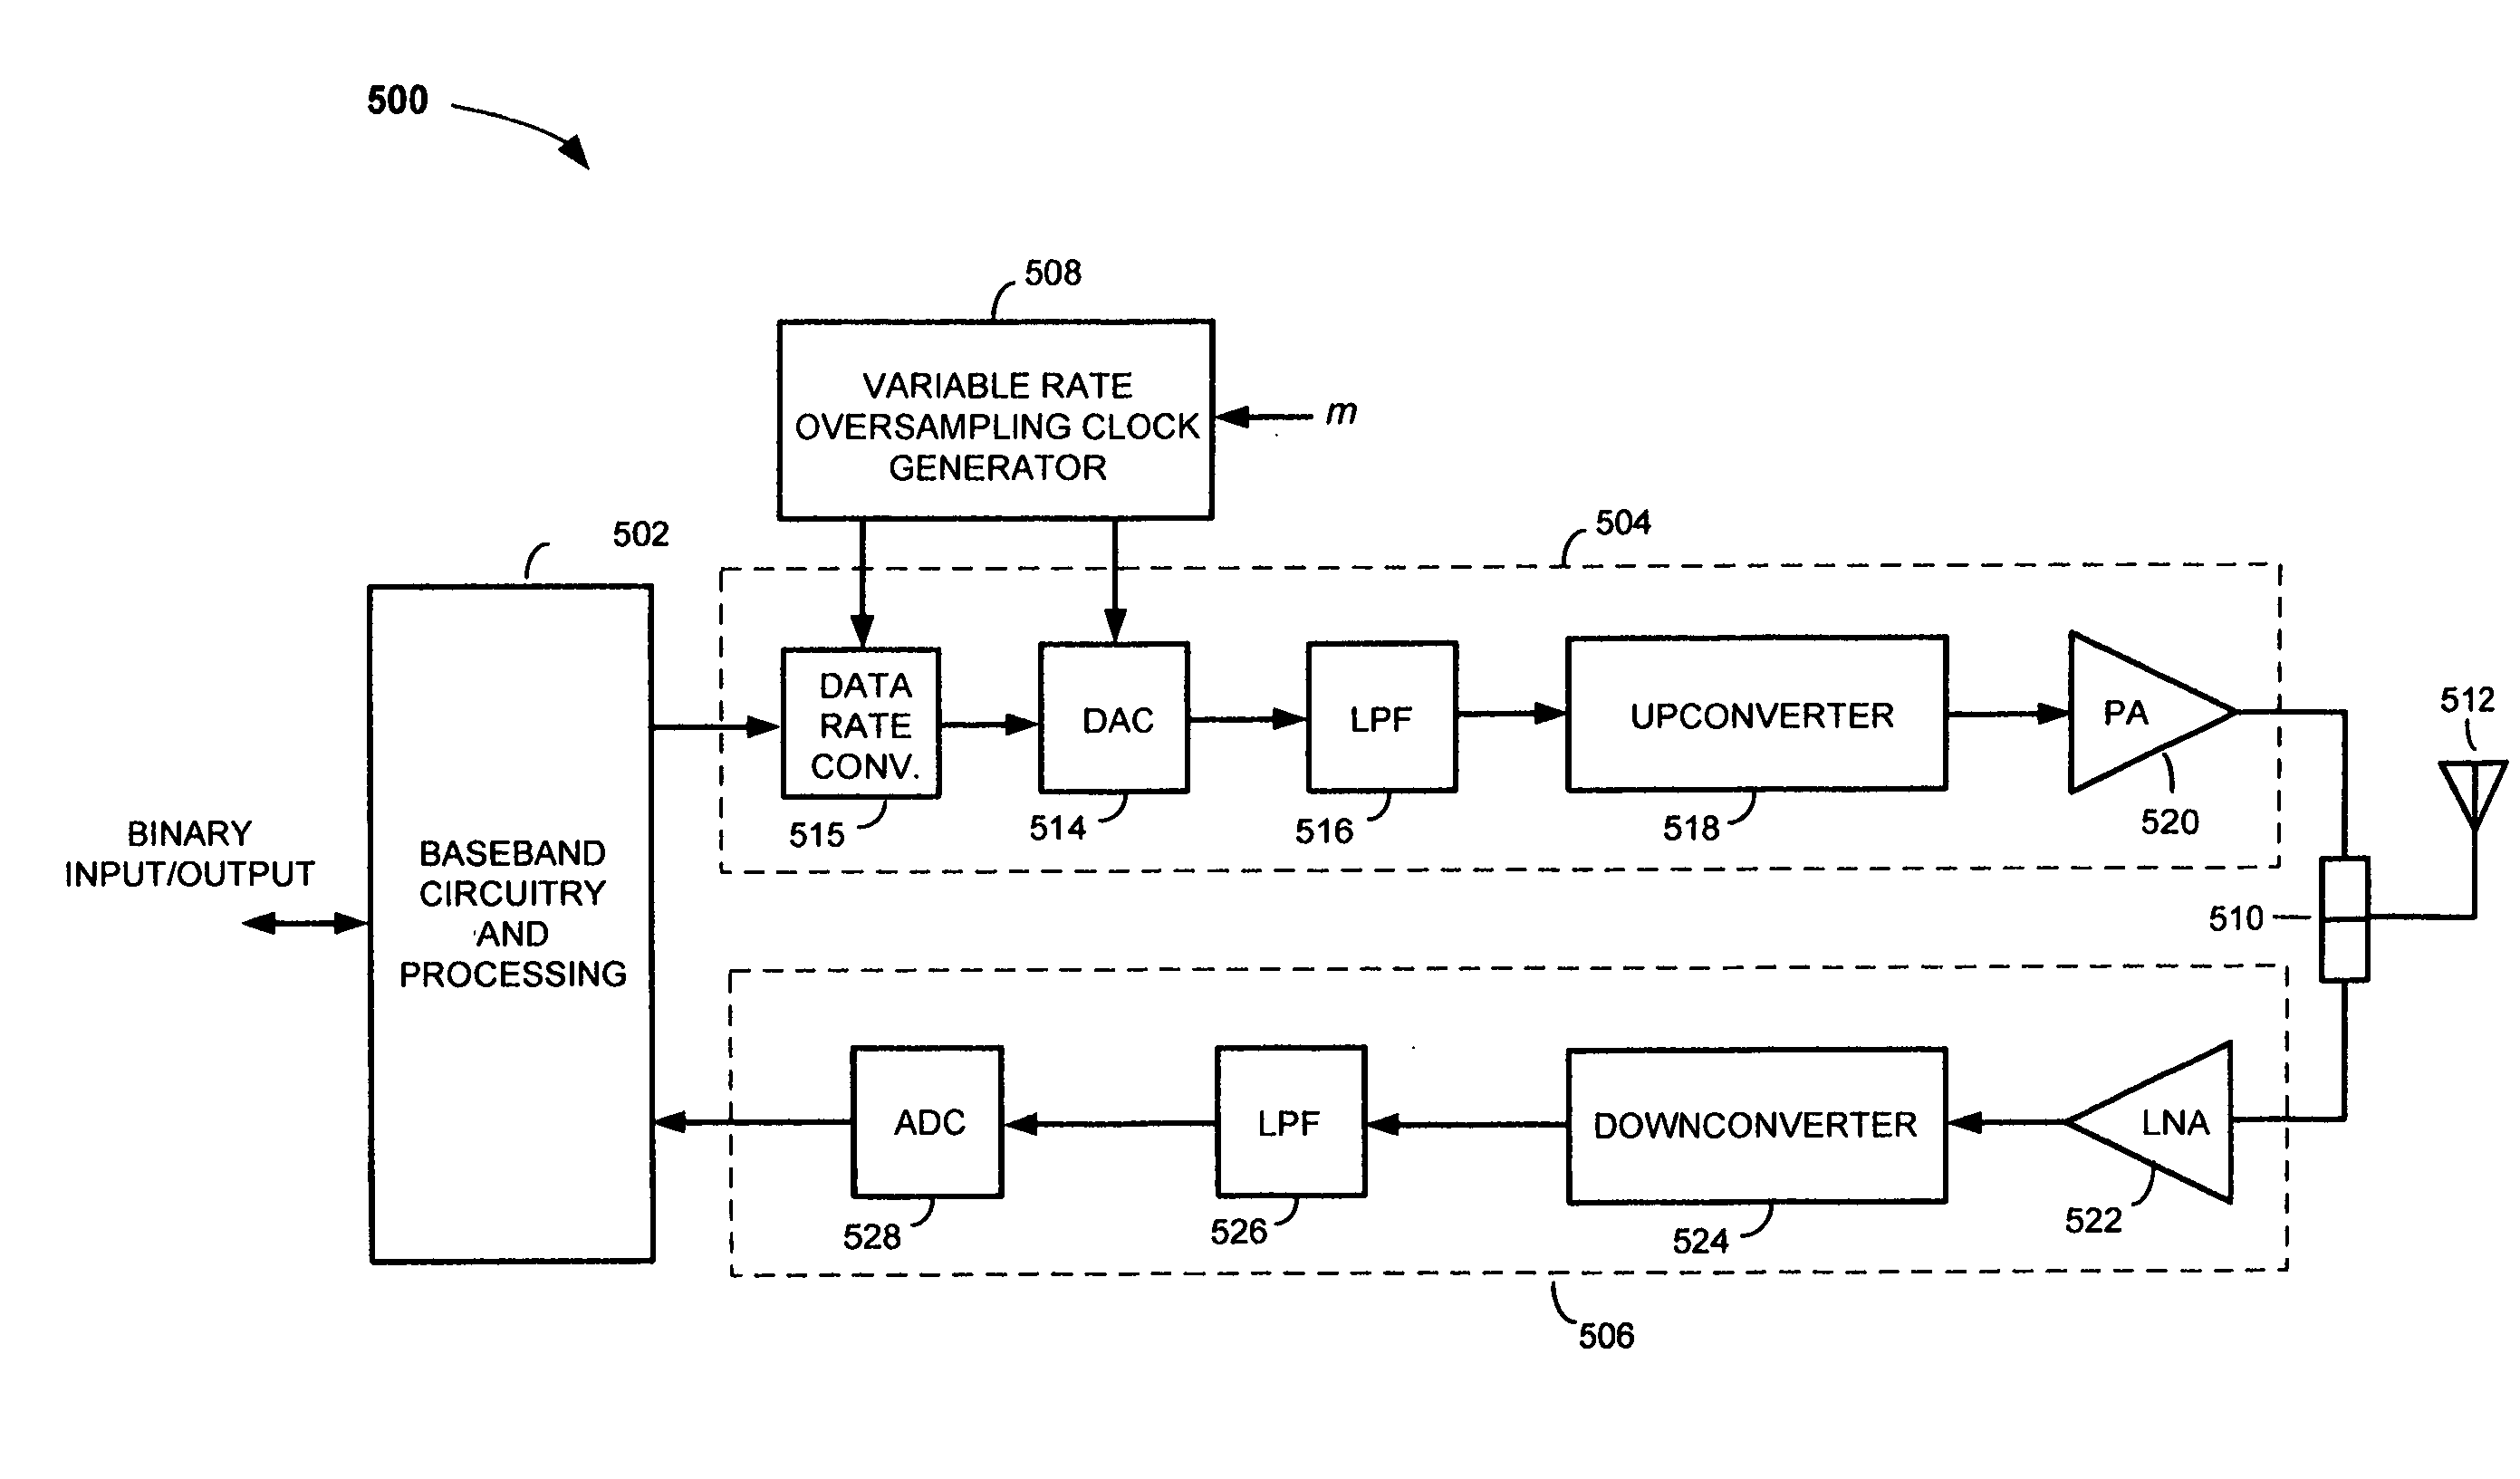 Methods and apparatus for reducing the effects of DAC images in radio frequency transceivers